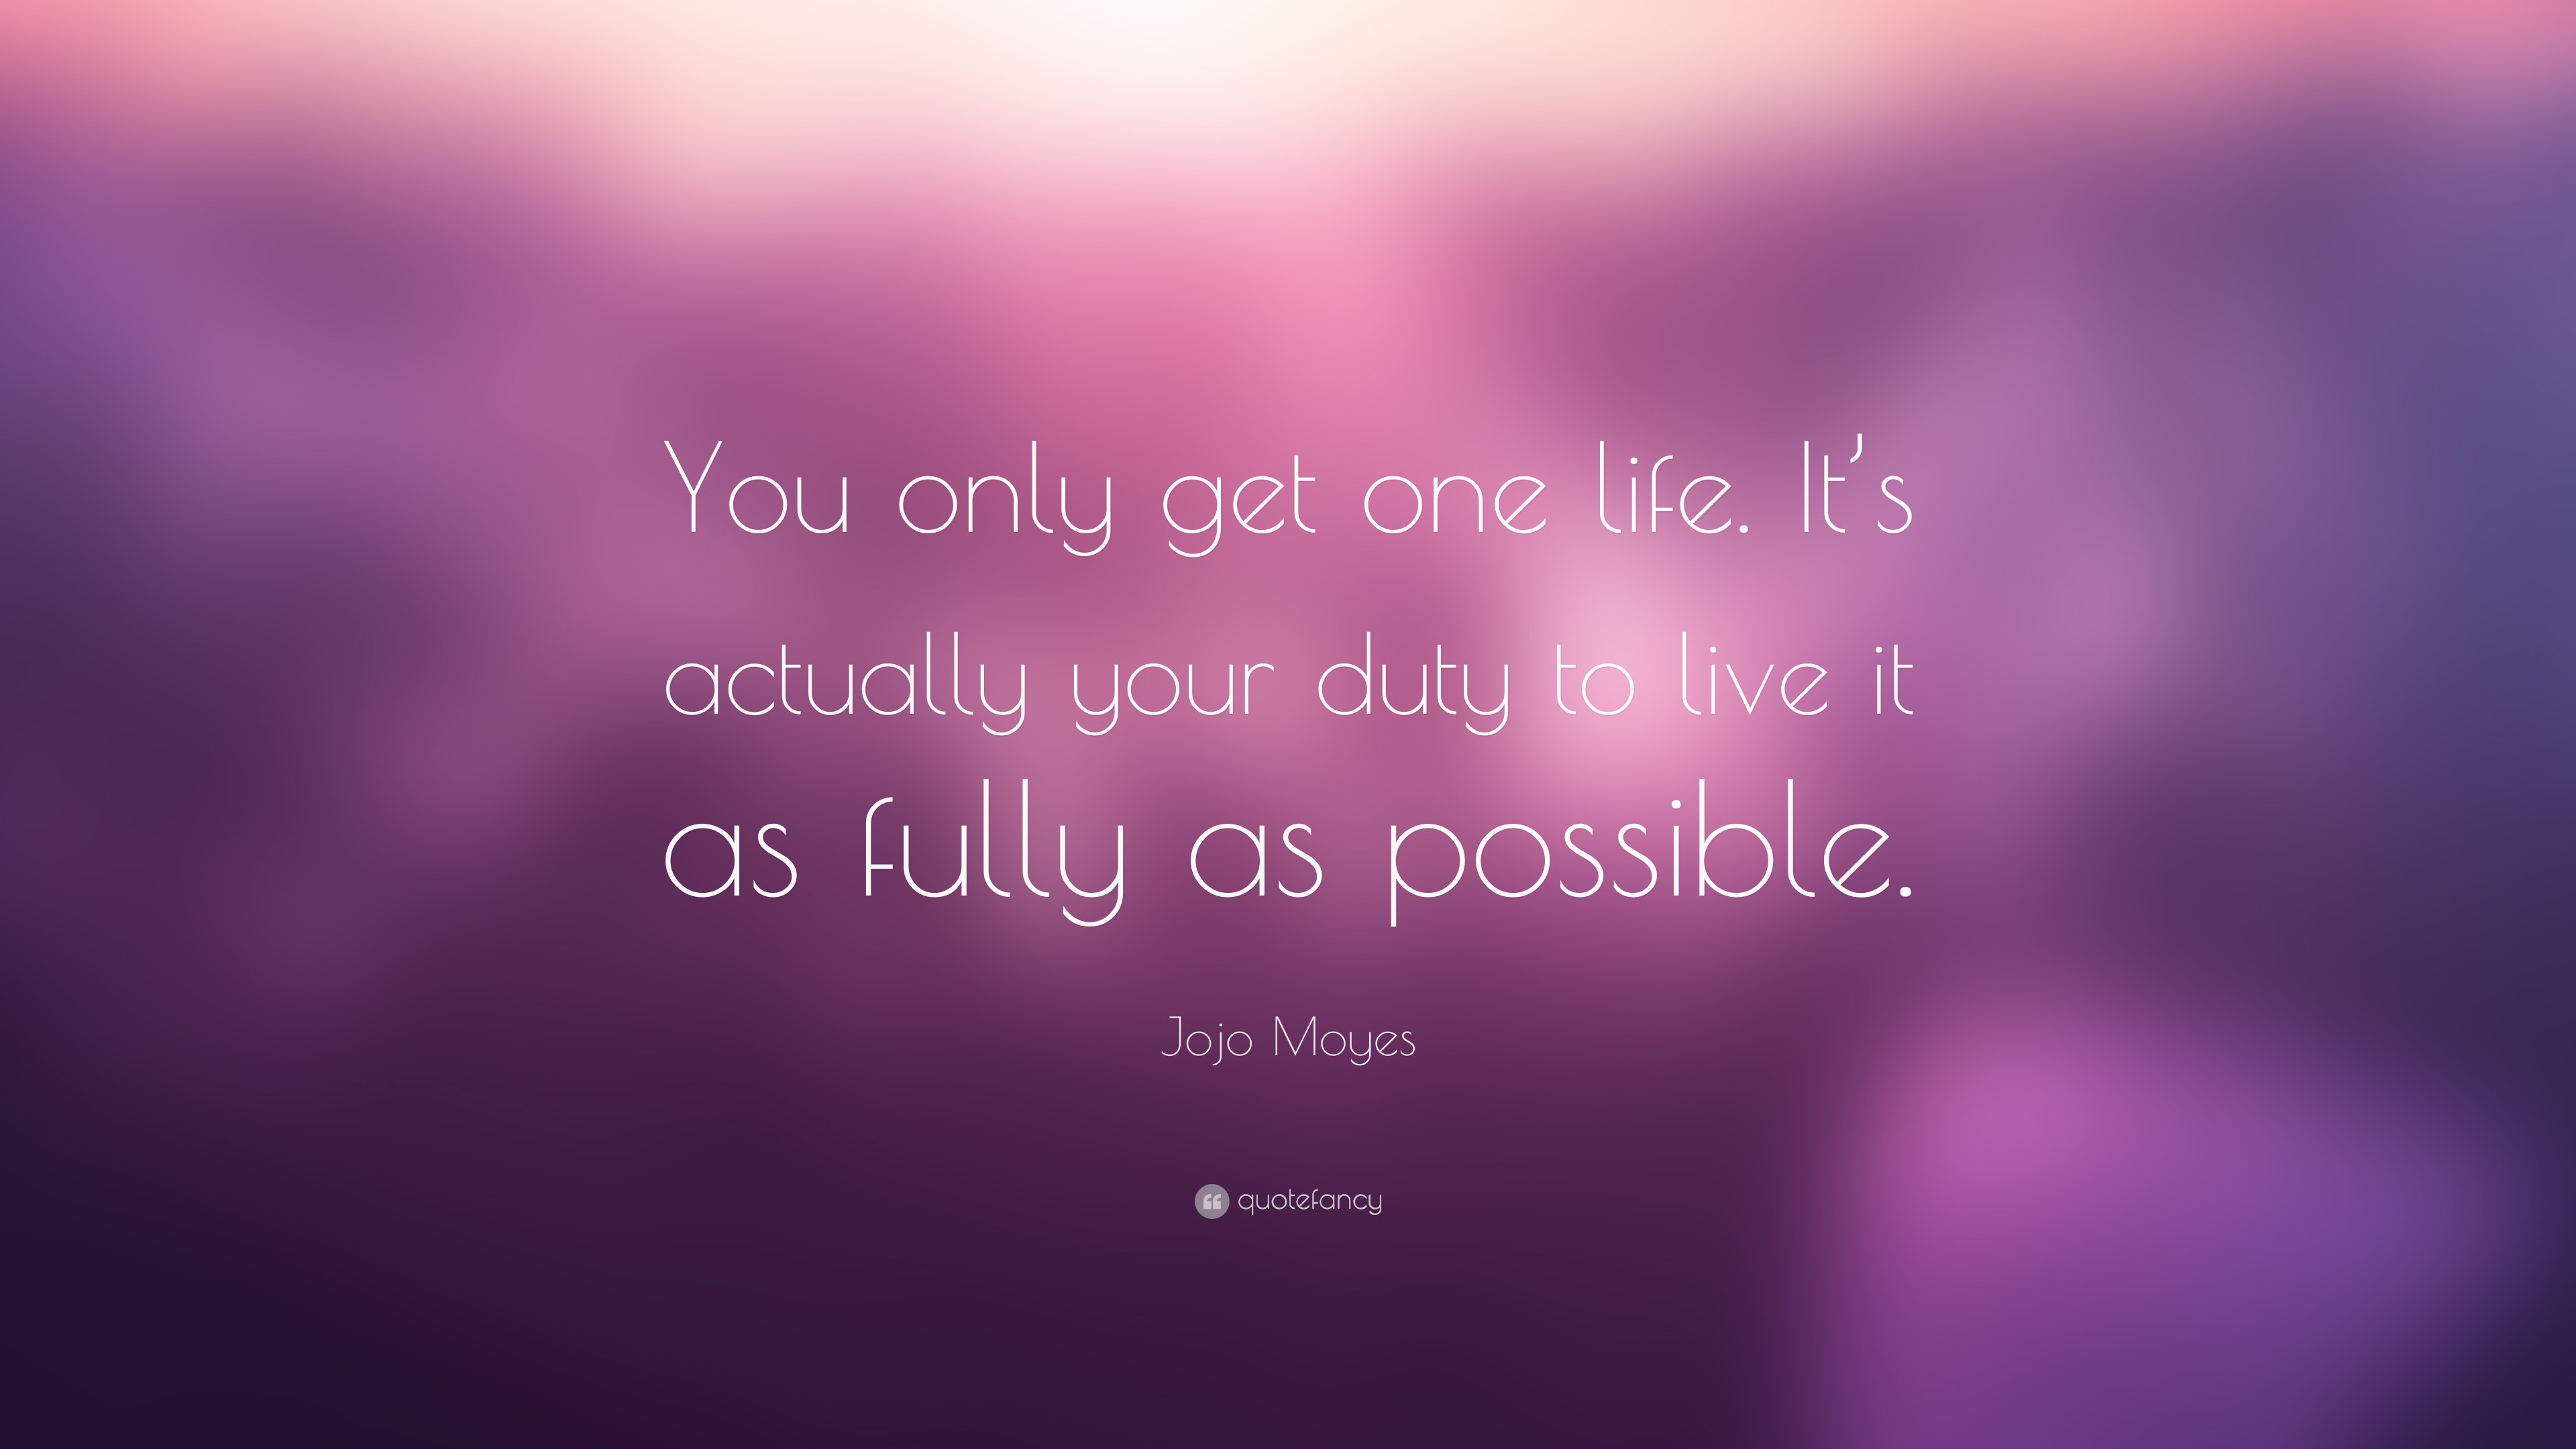 Jojo Moyes Quote: “You only get one life. It’s actually your duty to ...